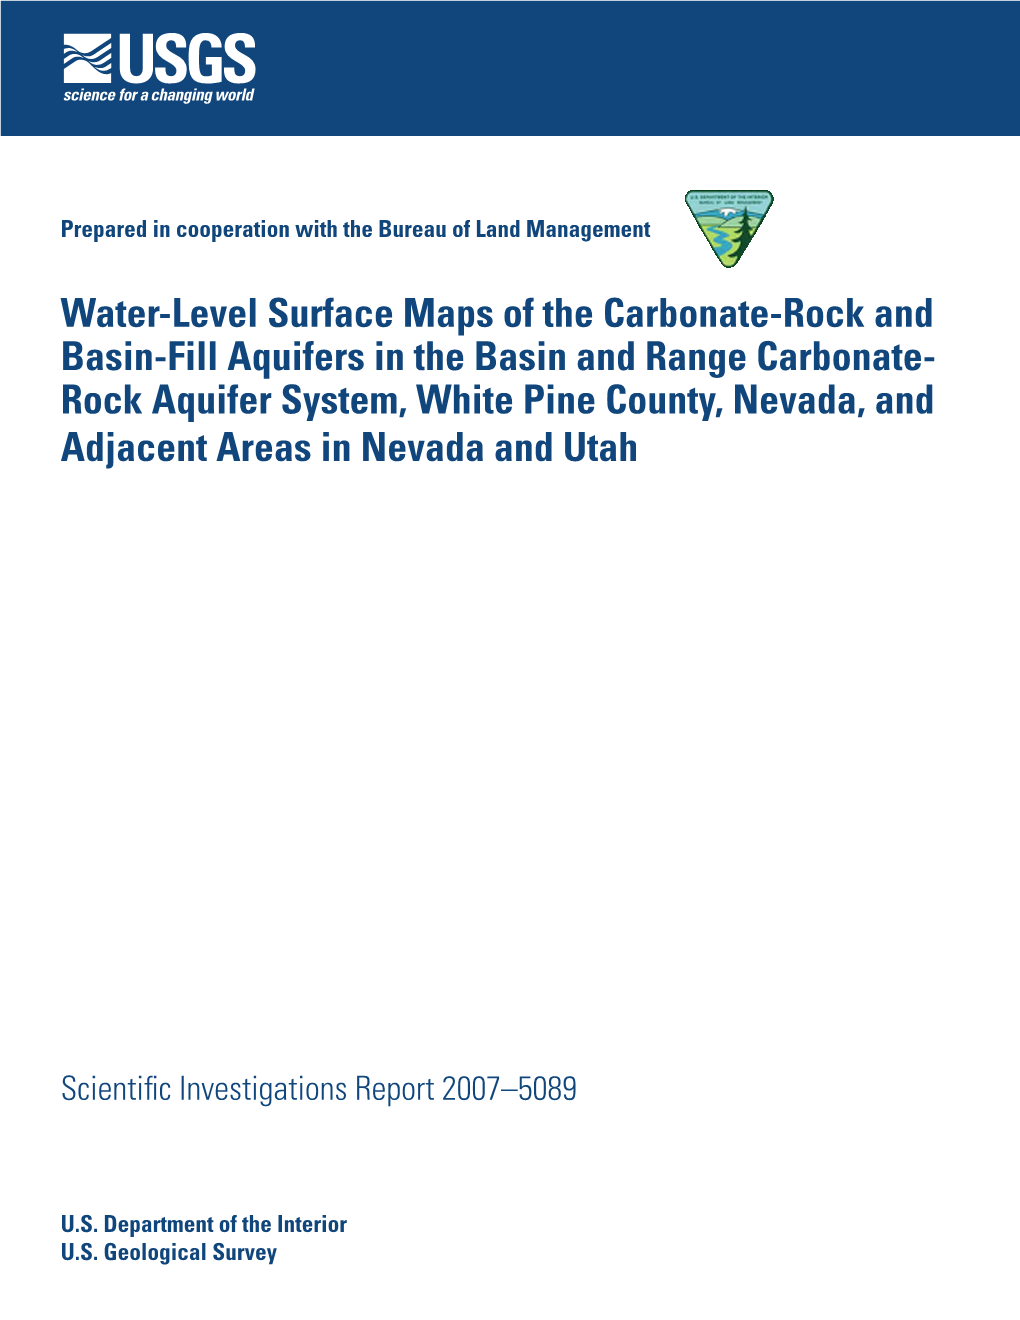 Rock Aquifer System, White Pine County, Nevada, and Adjacent Areas in Nevada and Utah